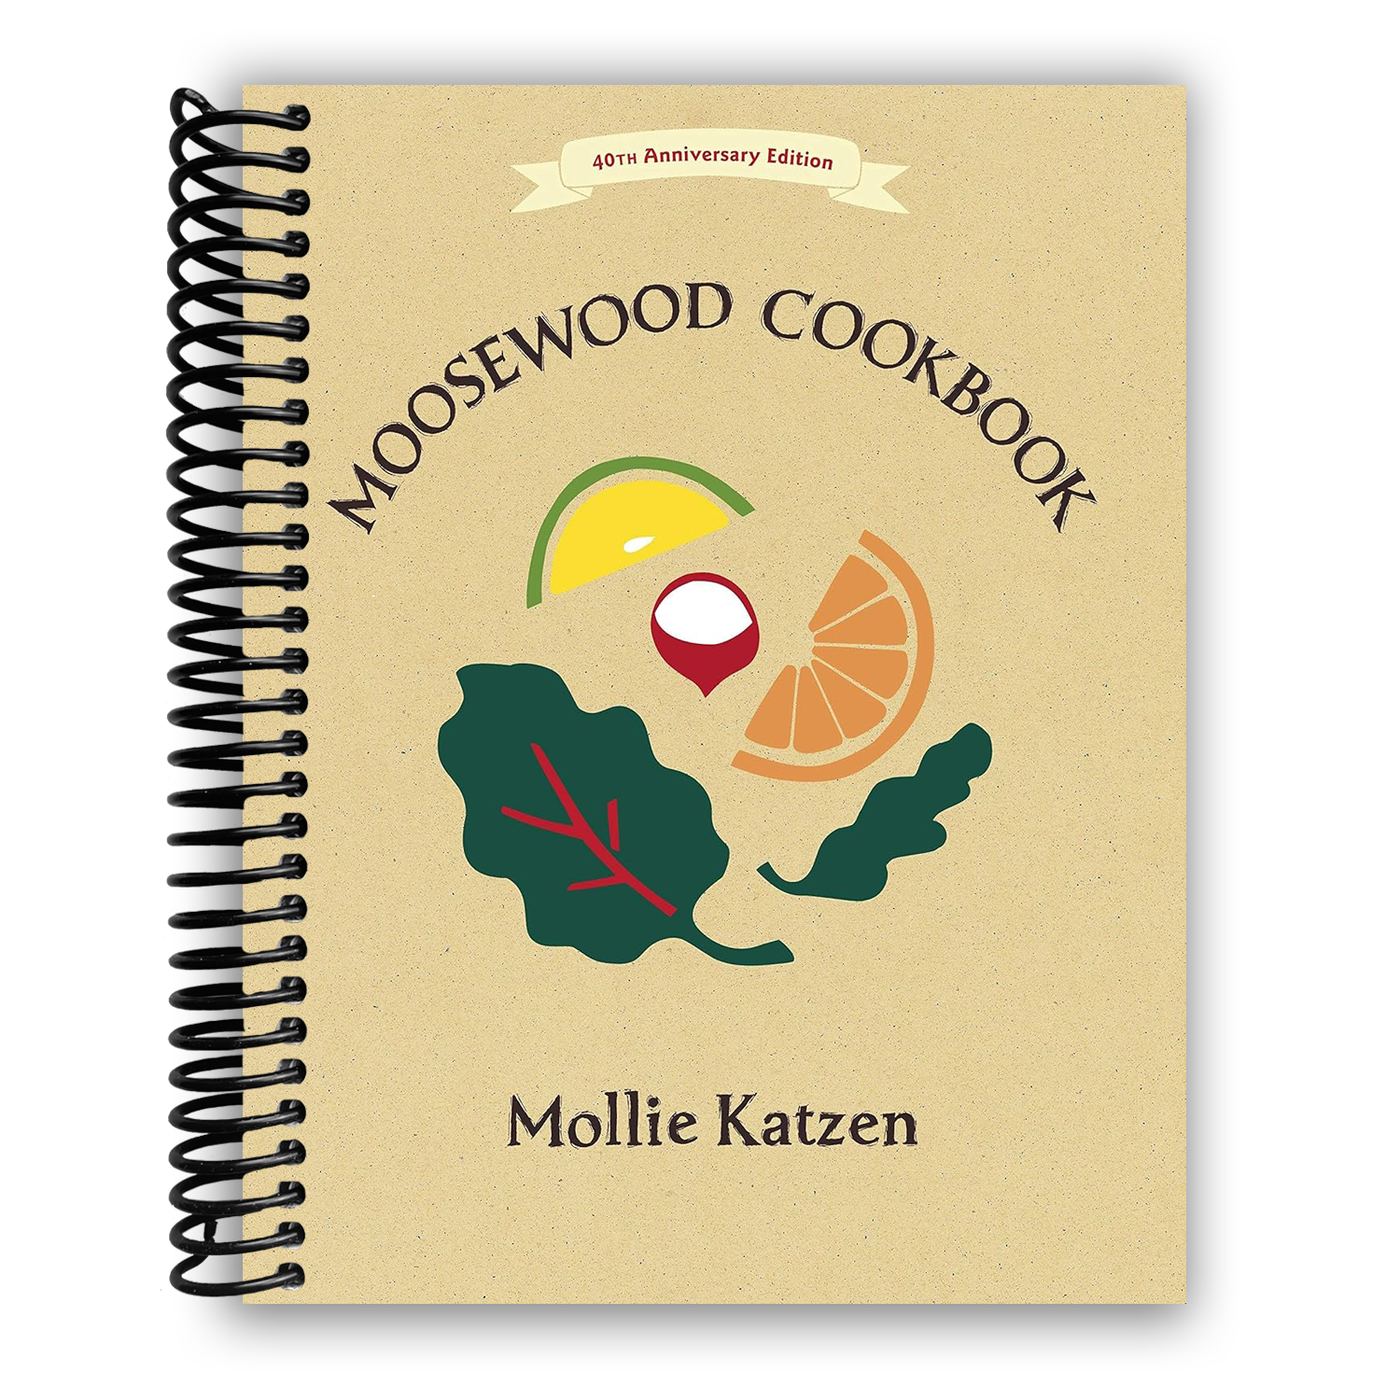 The Moosewood Cookbook: 40th Anniversary Edition (Spiral Bound)